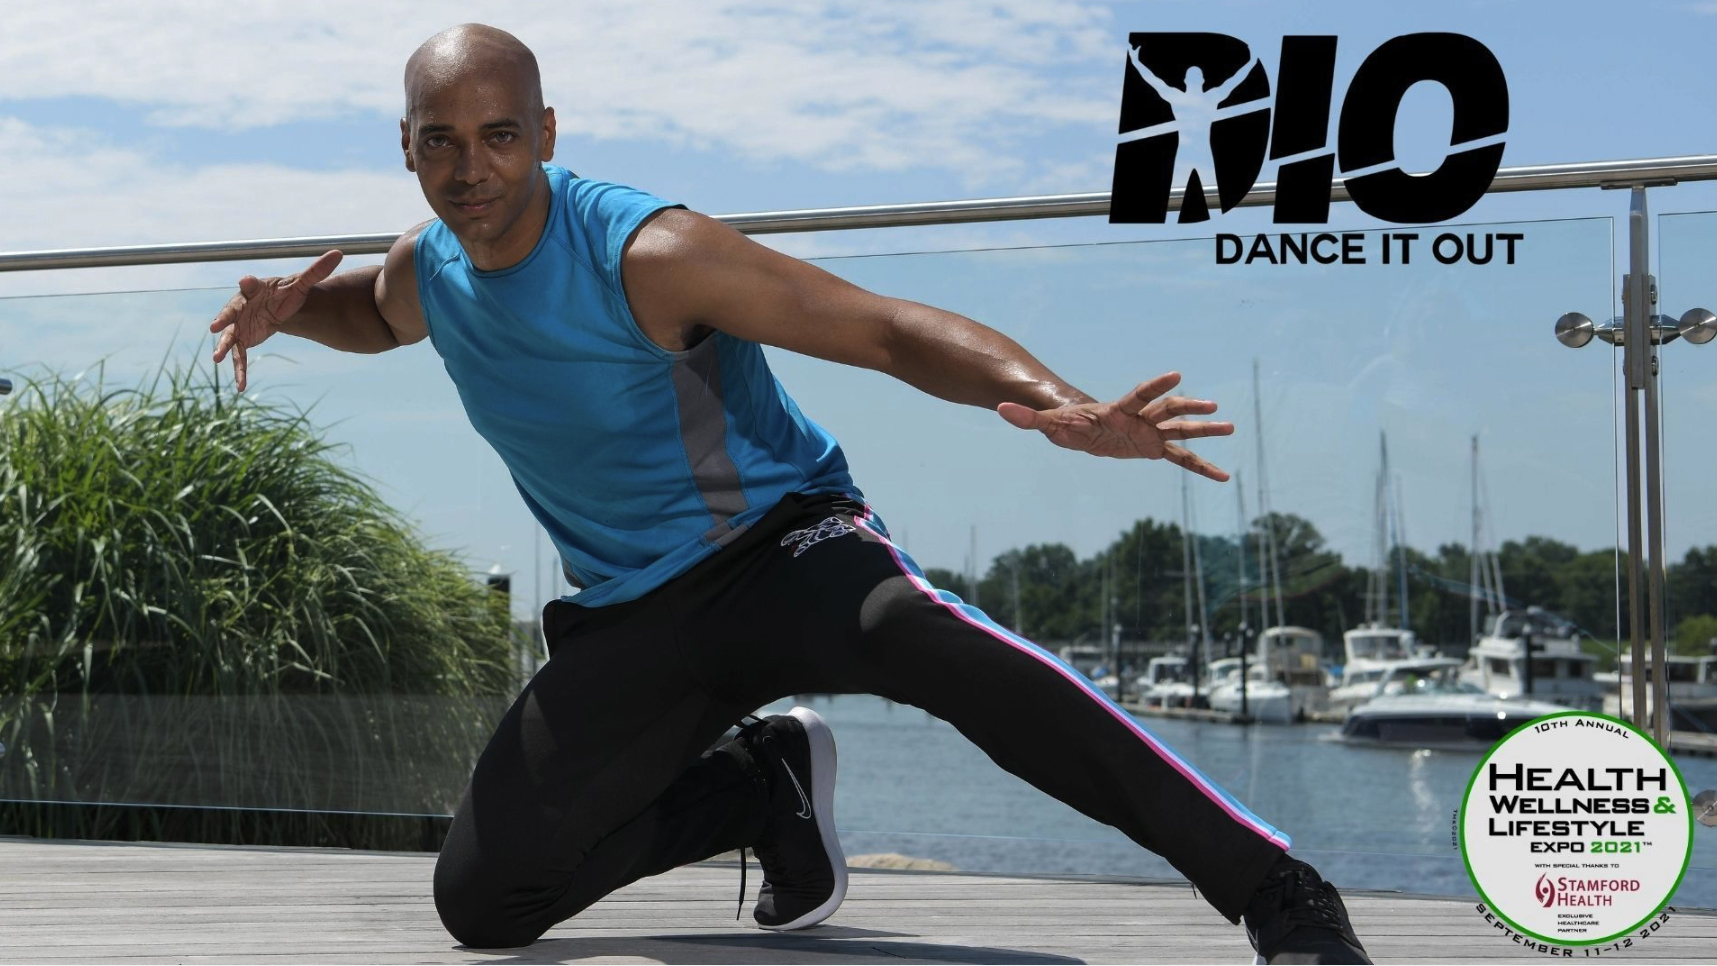 Billy Blanks Jnr. - Save The Date!